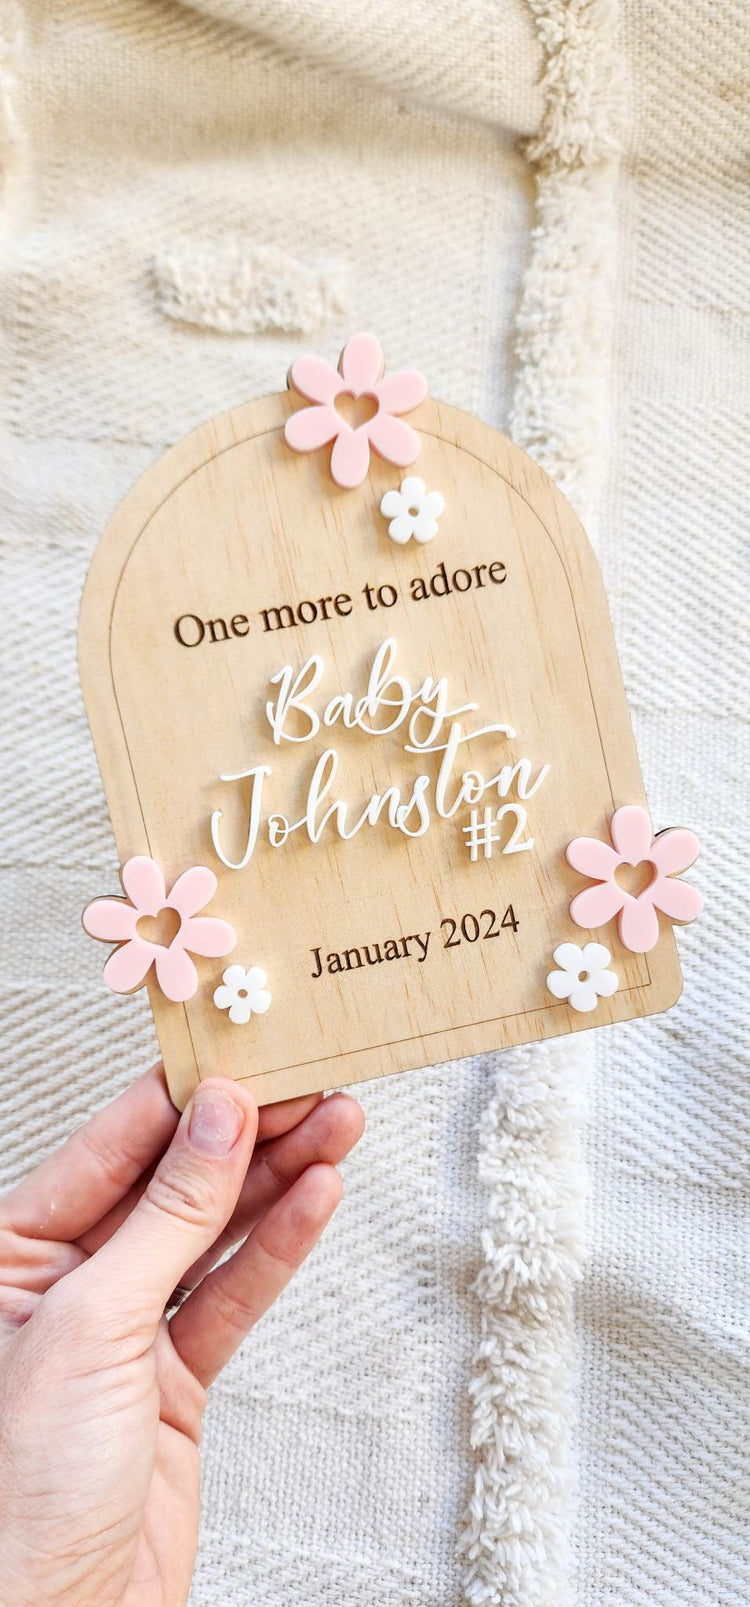 One more to adore - Daisy Announcement Plaque